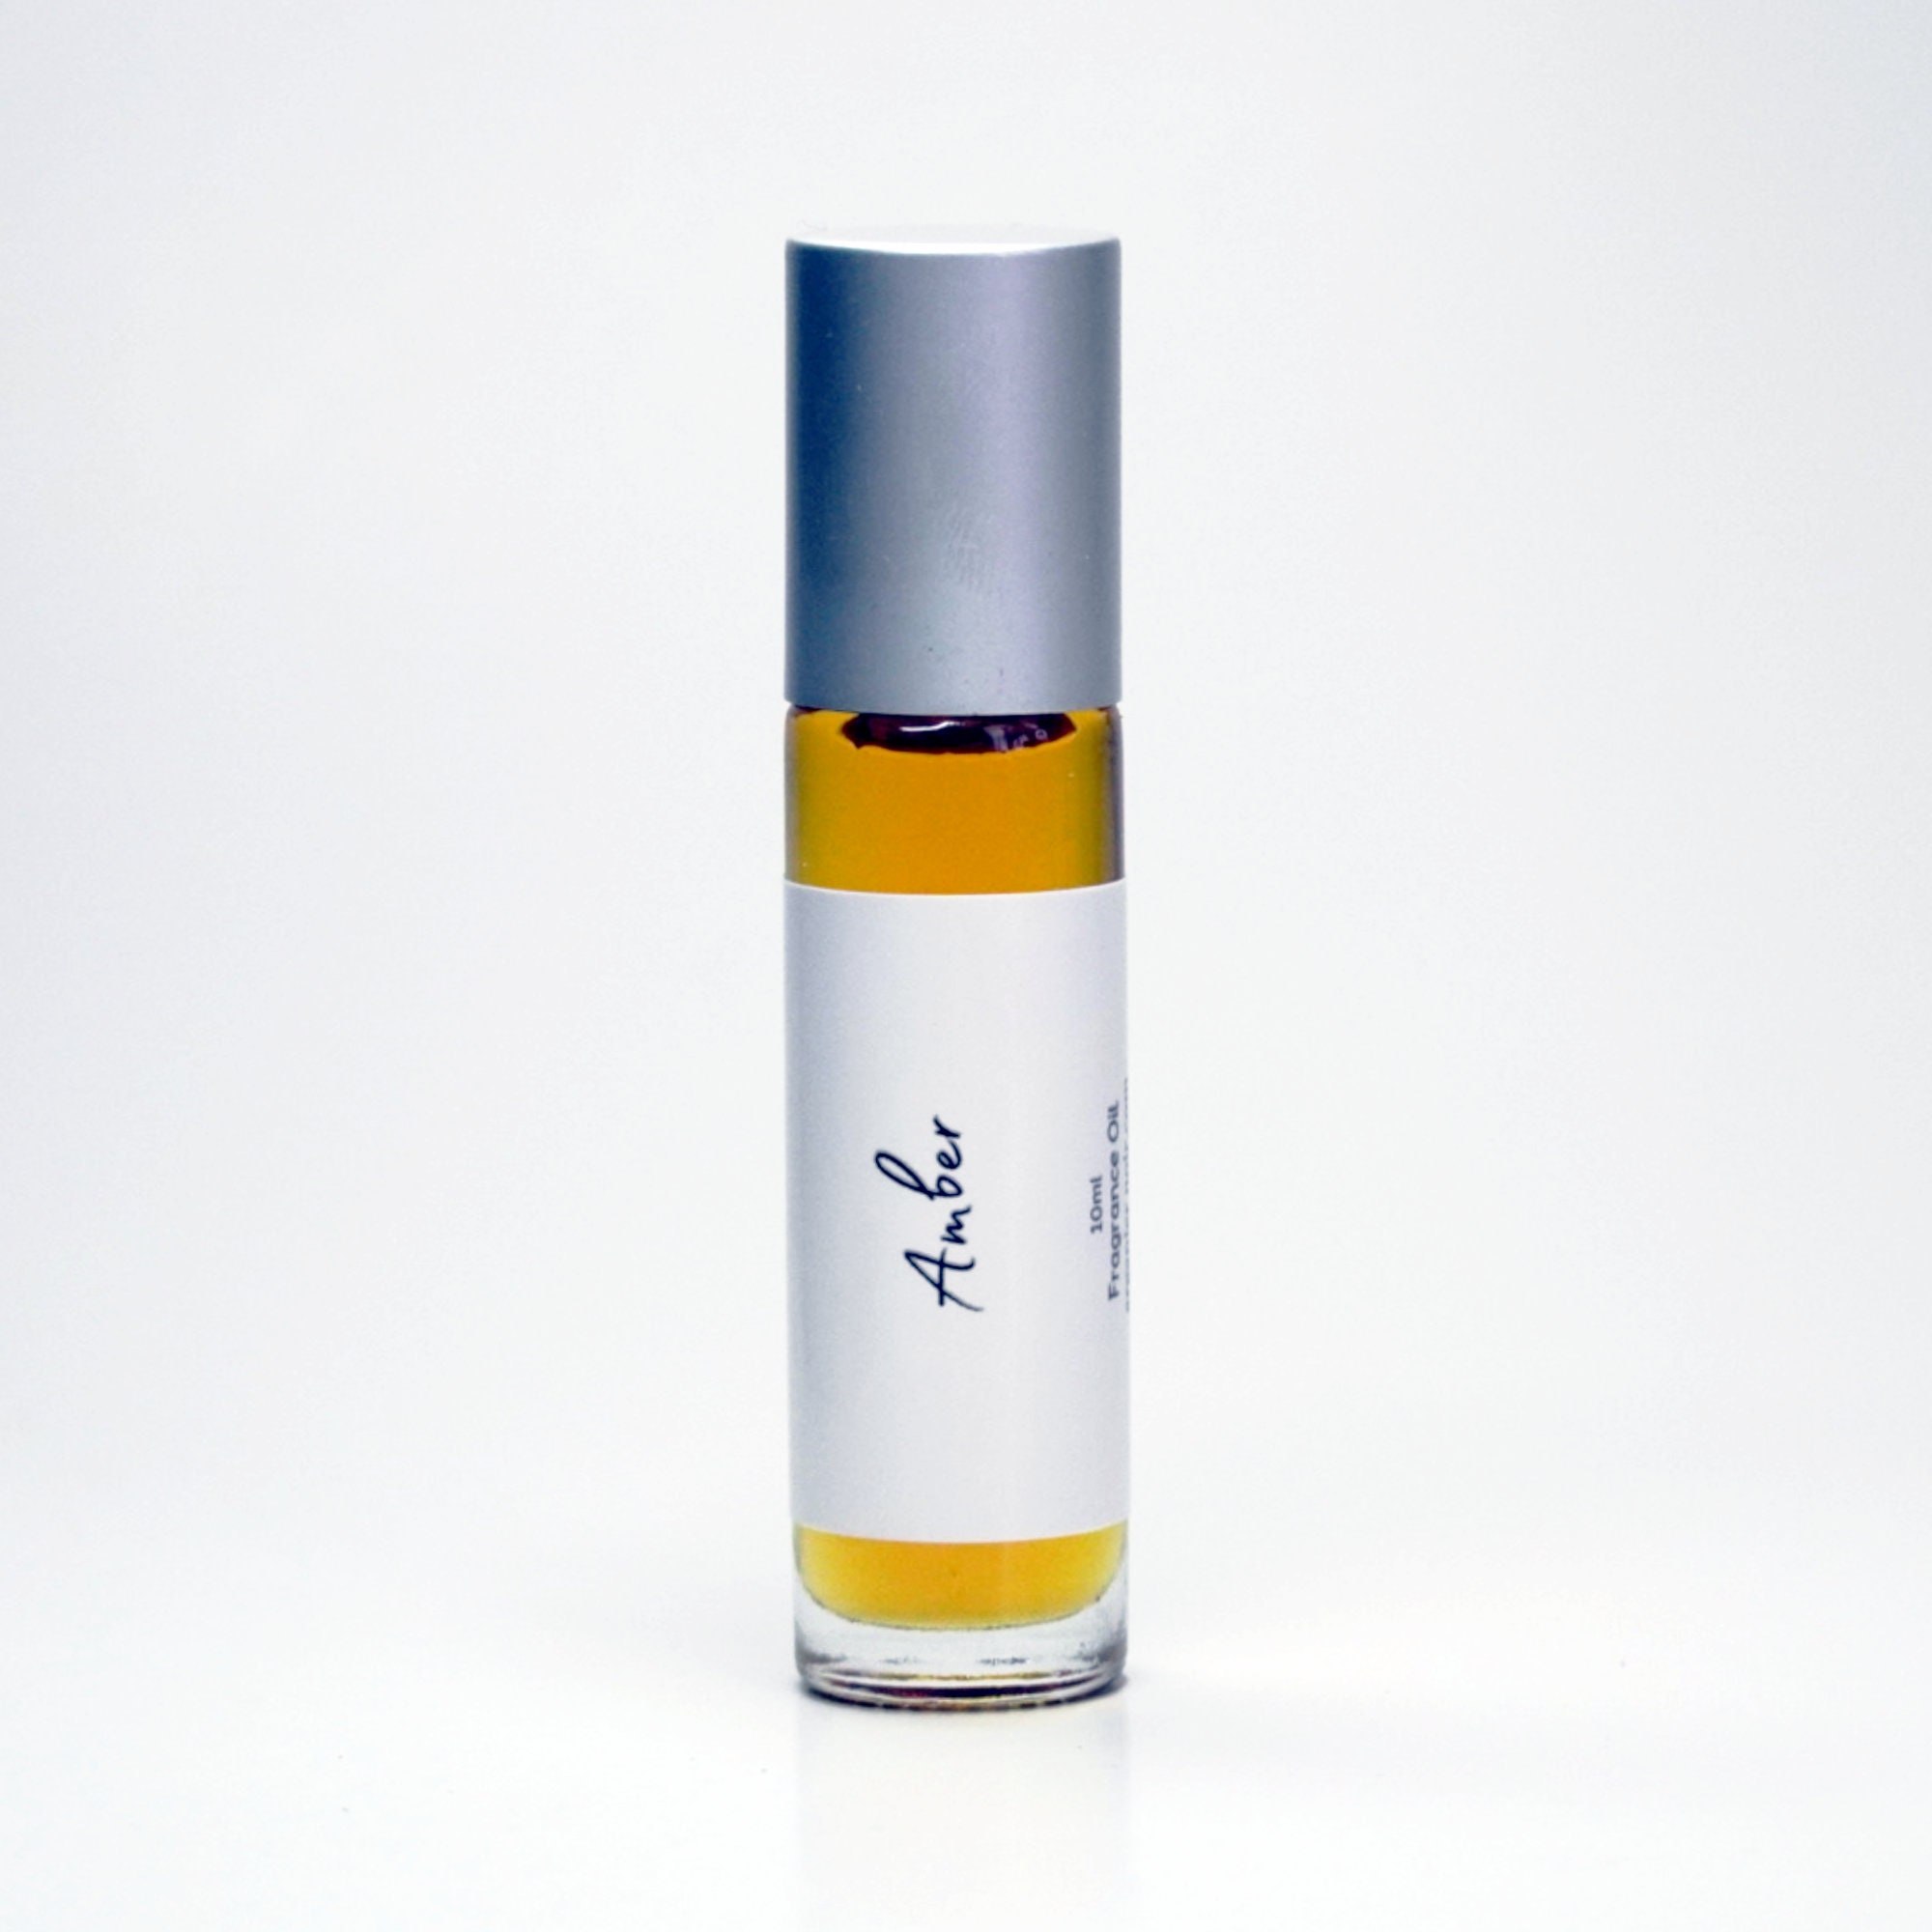 Amber Musk - Musk Amber - Attar - Concenrated Fragrance Oil - ITR